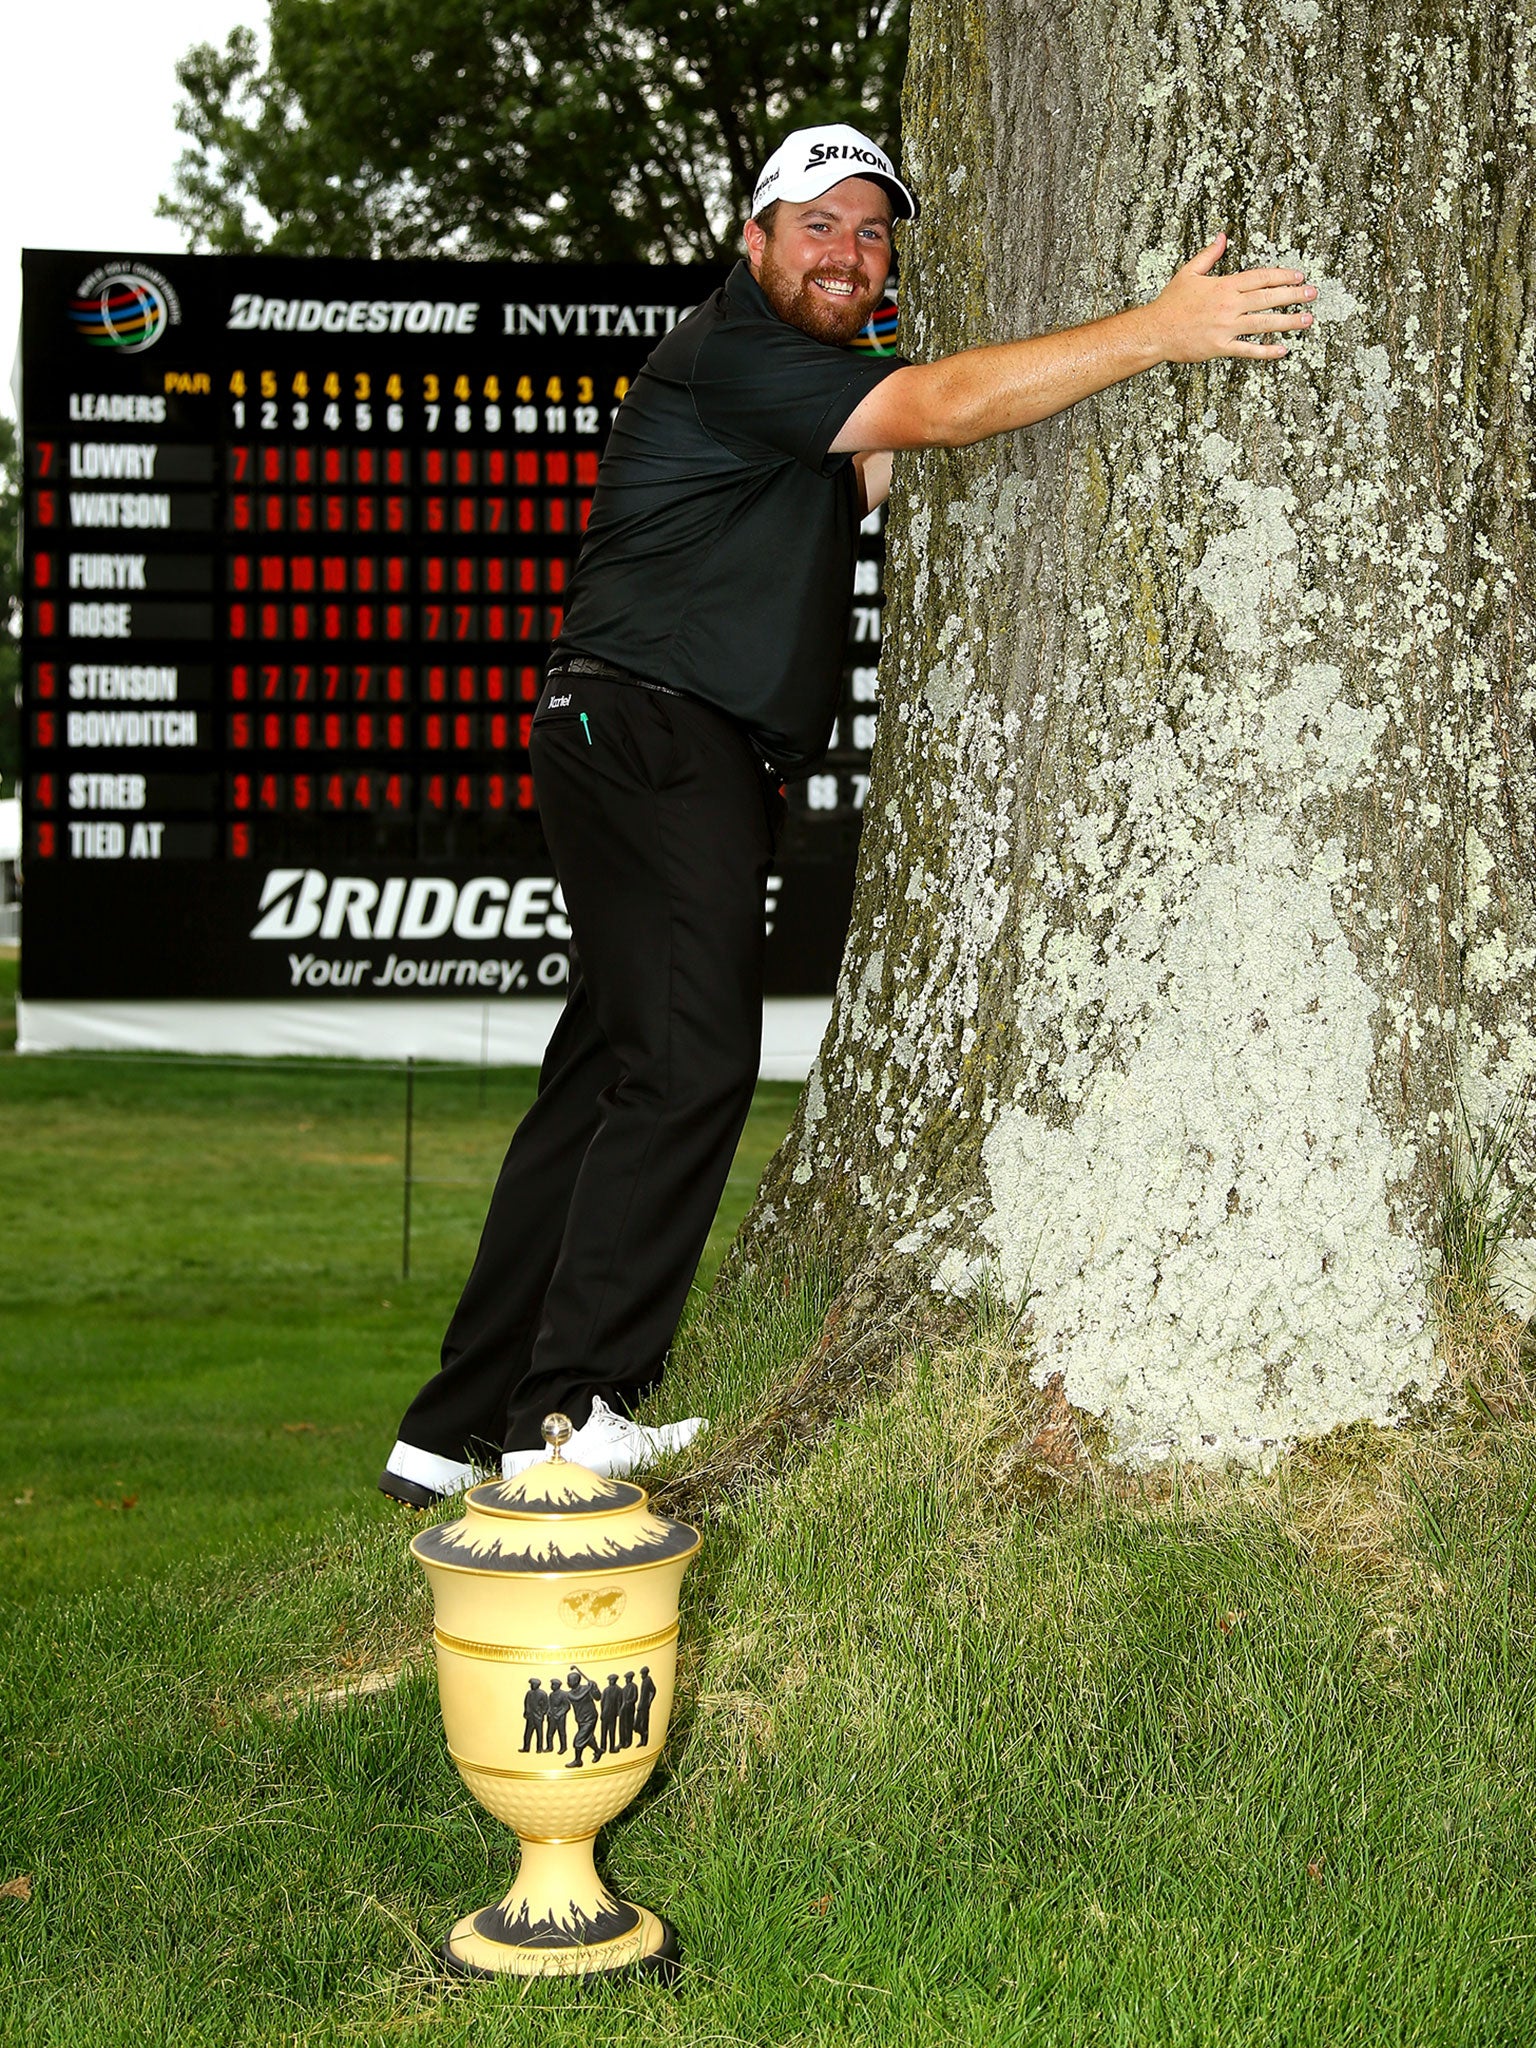 Shane Lowry hugs the tree he struck with his approach shot, for a lucky bounce which let him birdie the last and win the Bridgestone Invitational